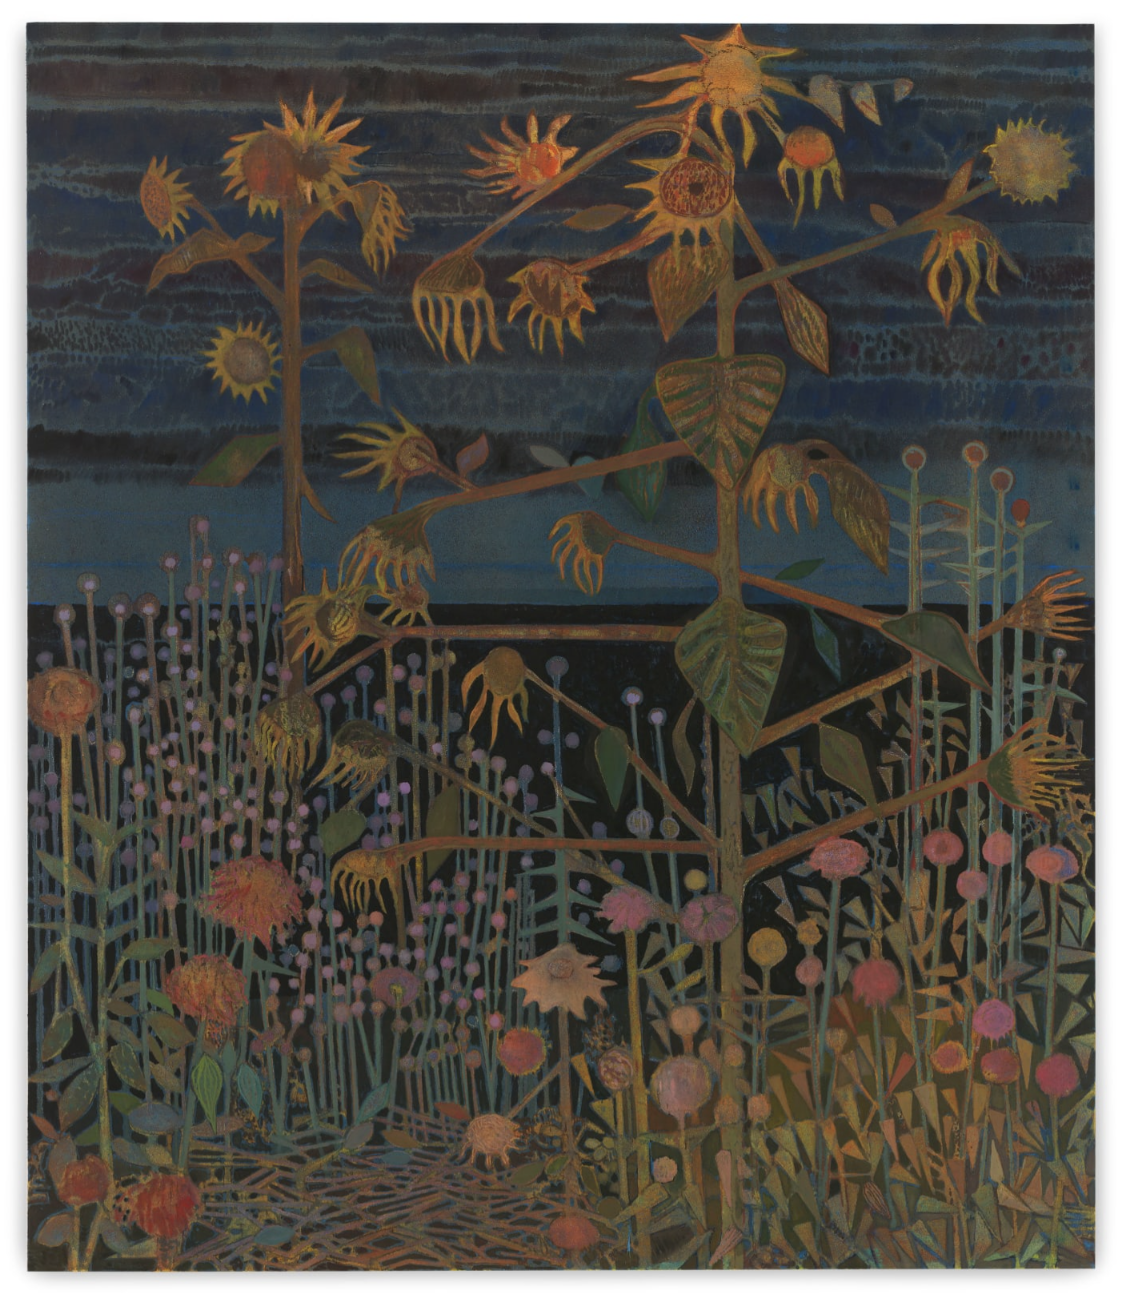    Flowers at the North Sea , 2023    Oil and sand on canvas    213.5 x 183cm (84 x 72in)  